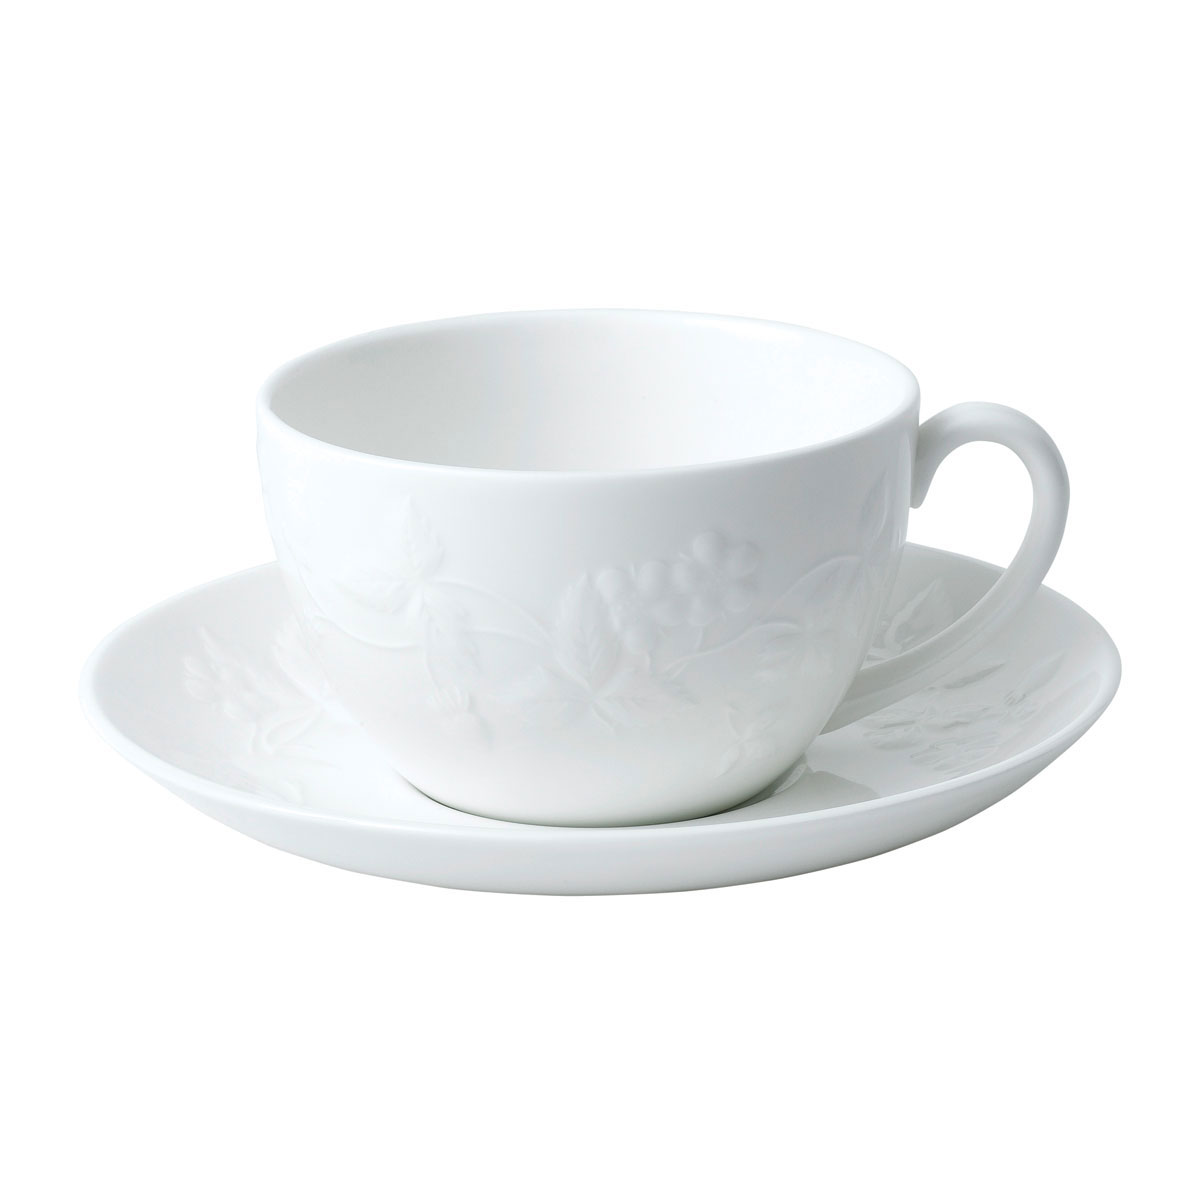 Wedgwood China Wild Strawberry White Teacup and Saucer Set